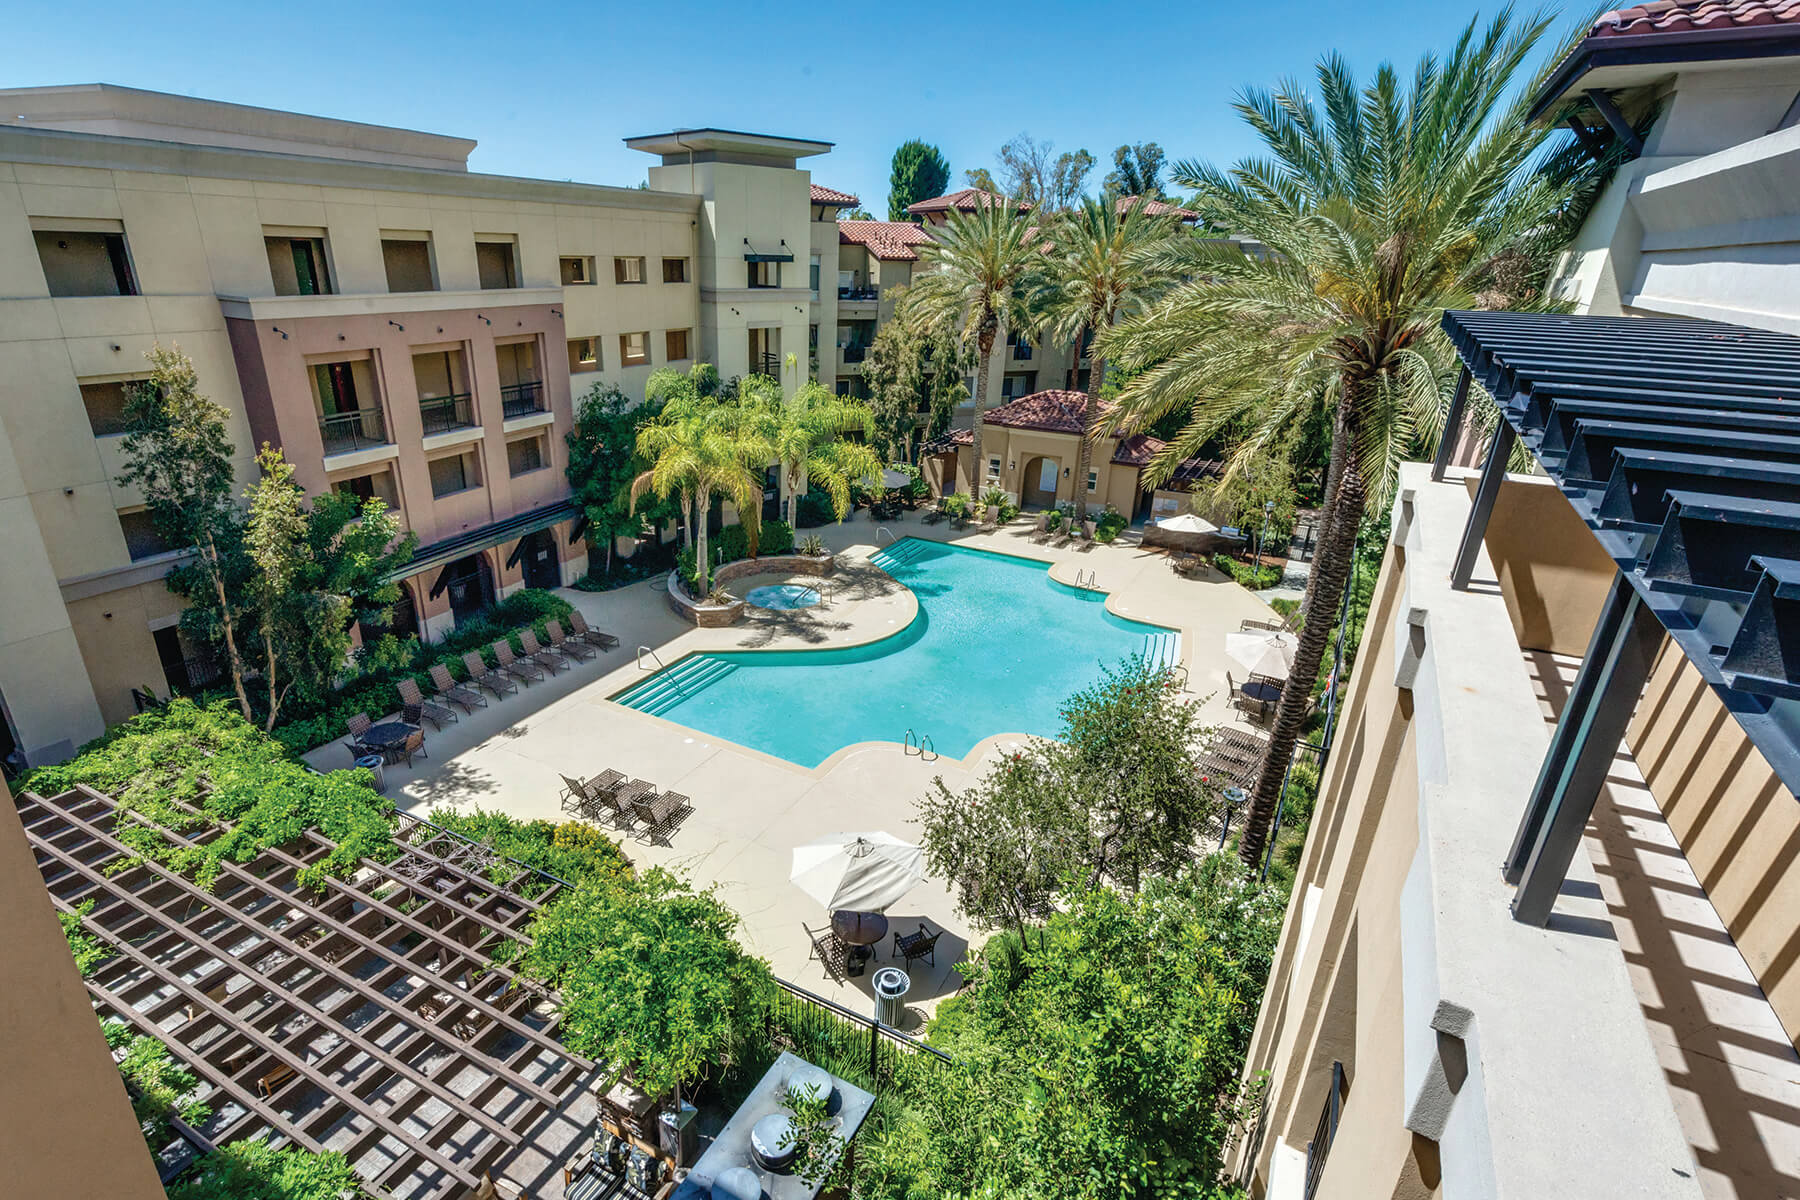 Aerial view of the courtyard pool at The Madison at Town Center apartments in Santa Clarita, California.